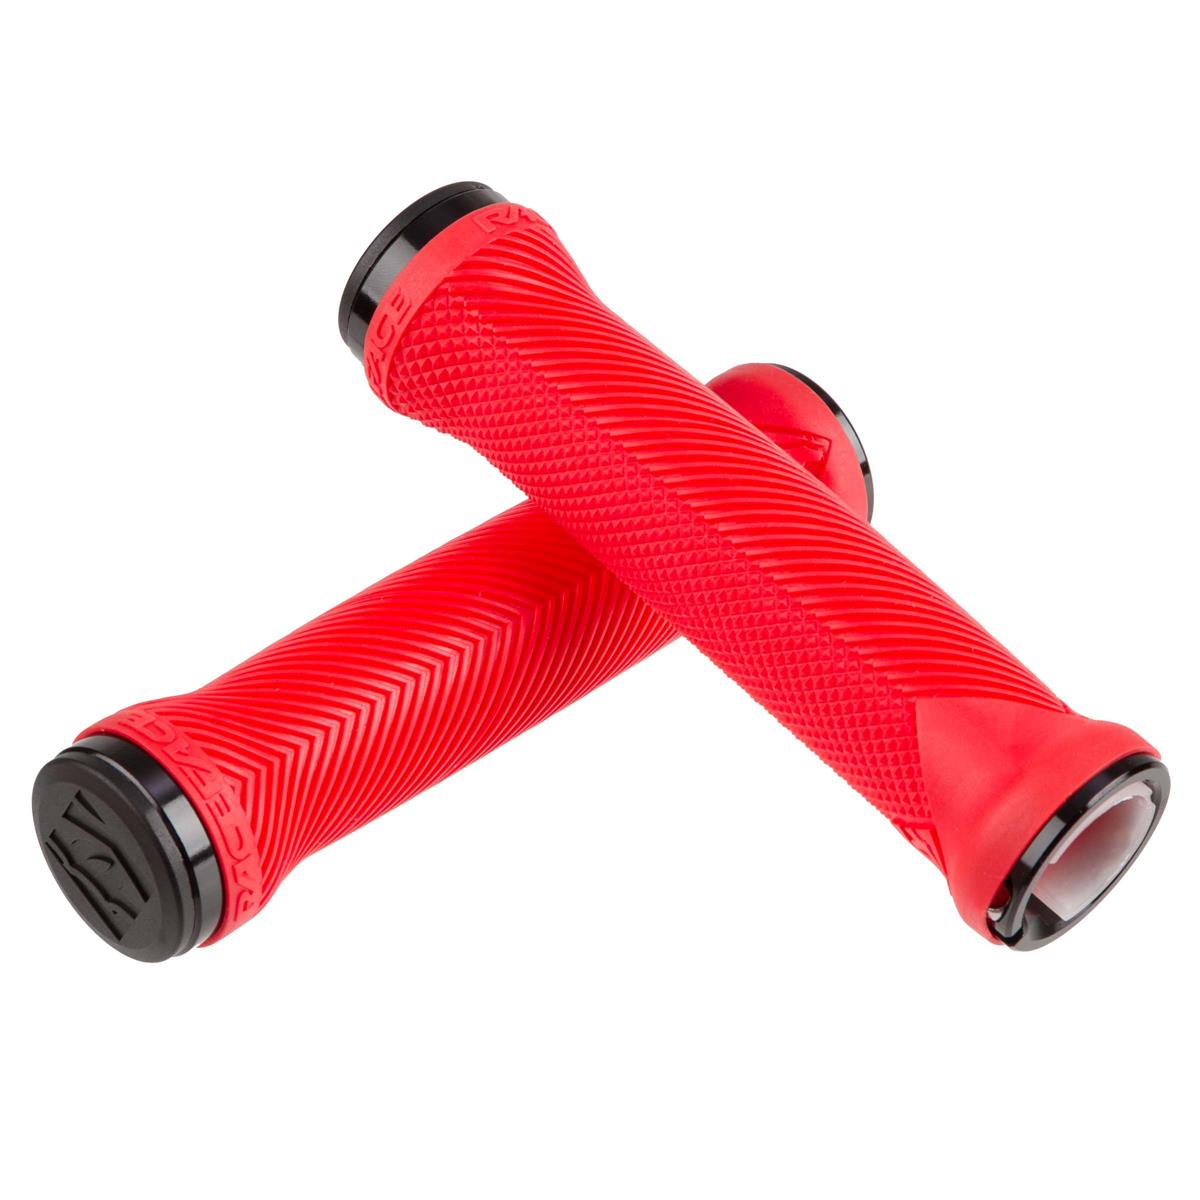 Race Face MTB Grips Love Handle Lock-On Red, 130 mm